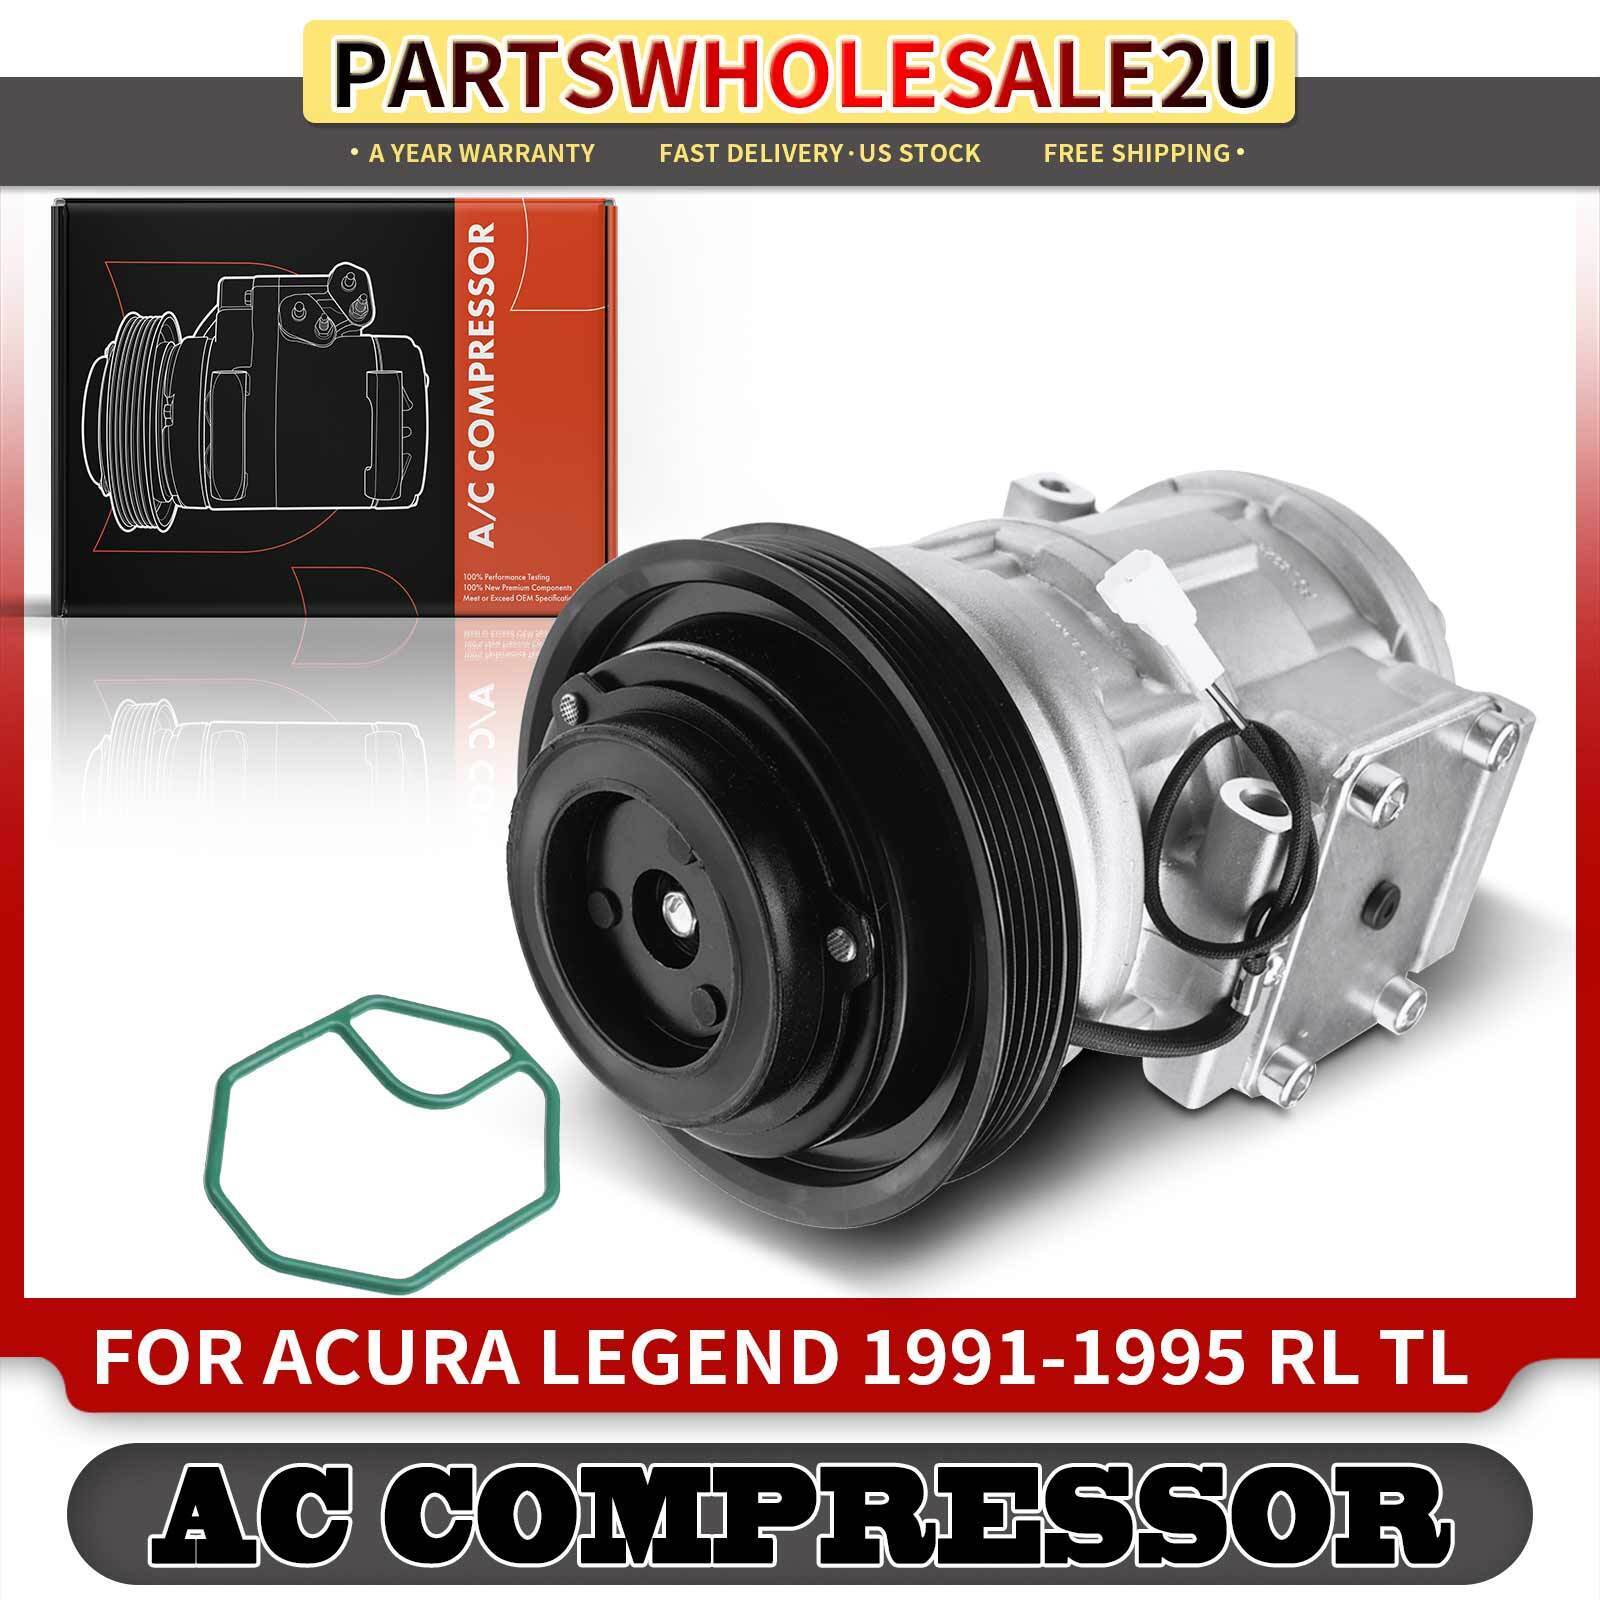 AC Compressor with Clutch for Acura Legend 91-95 RL 96-04 TL 96-98 V6 3.2L 3.5L